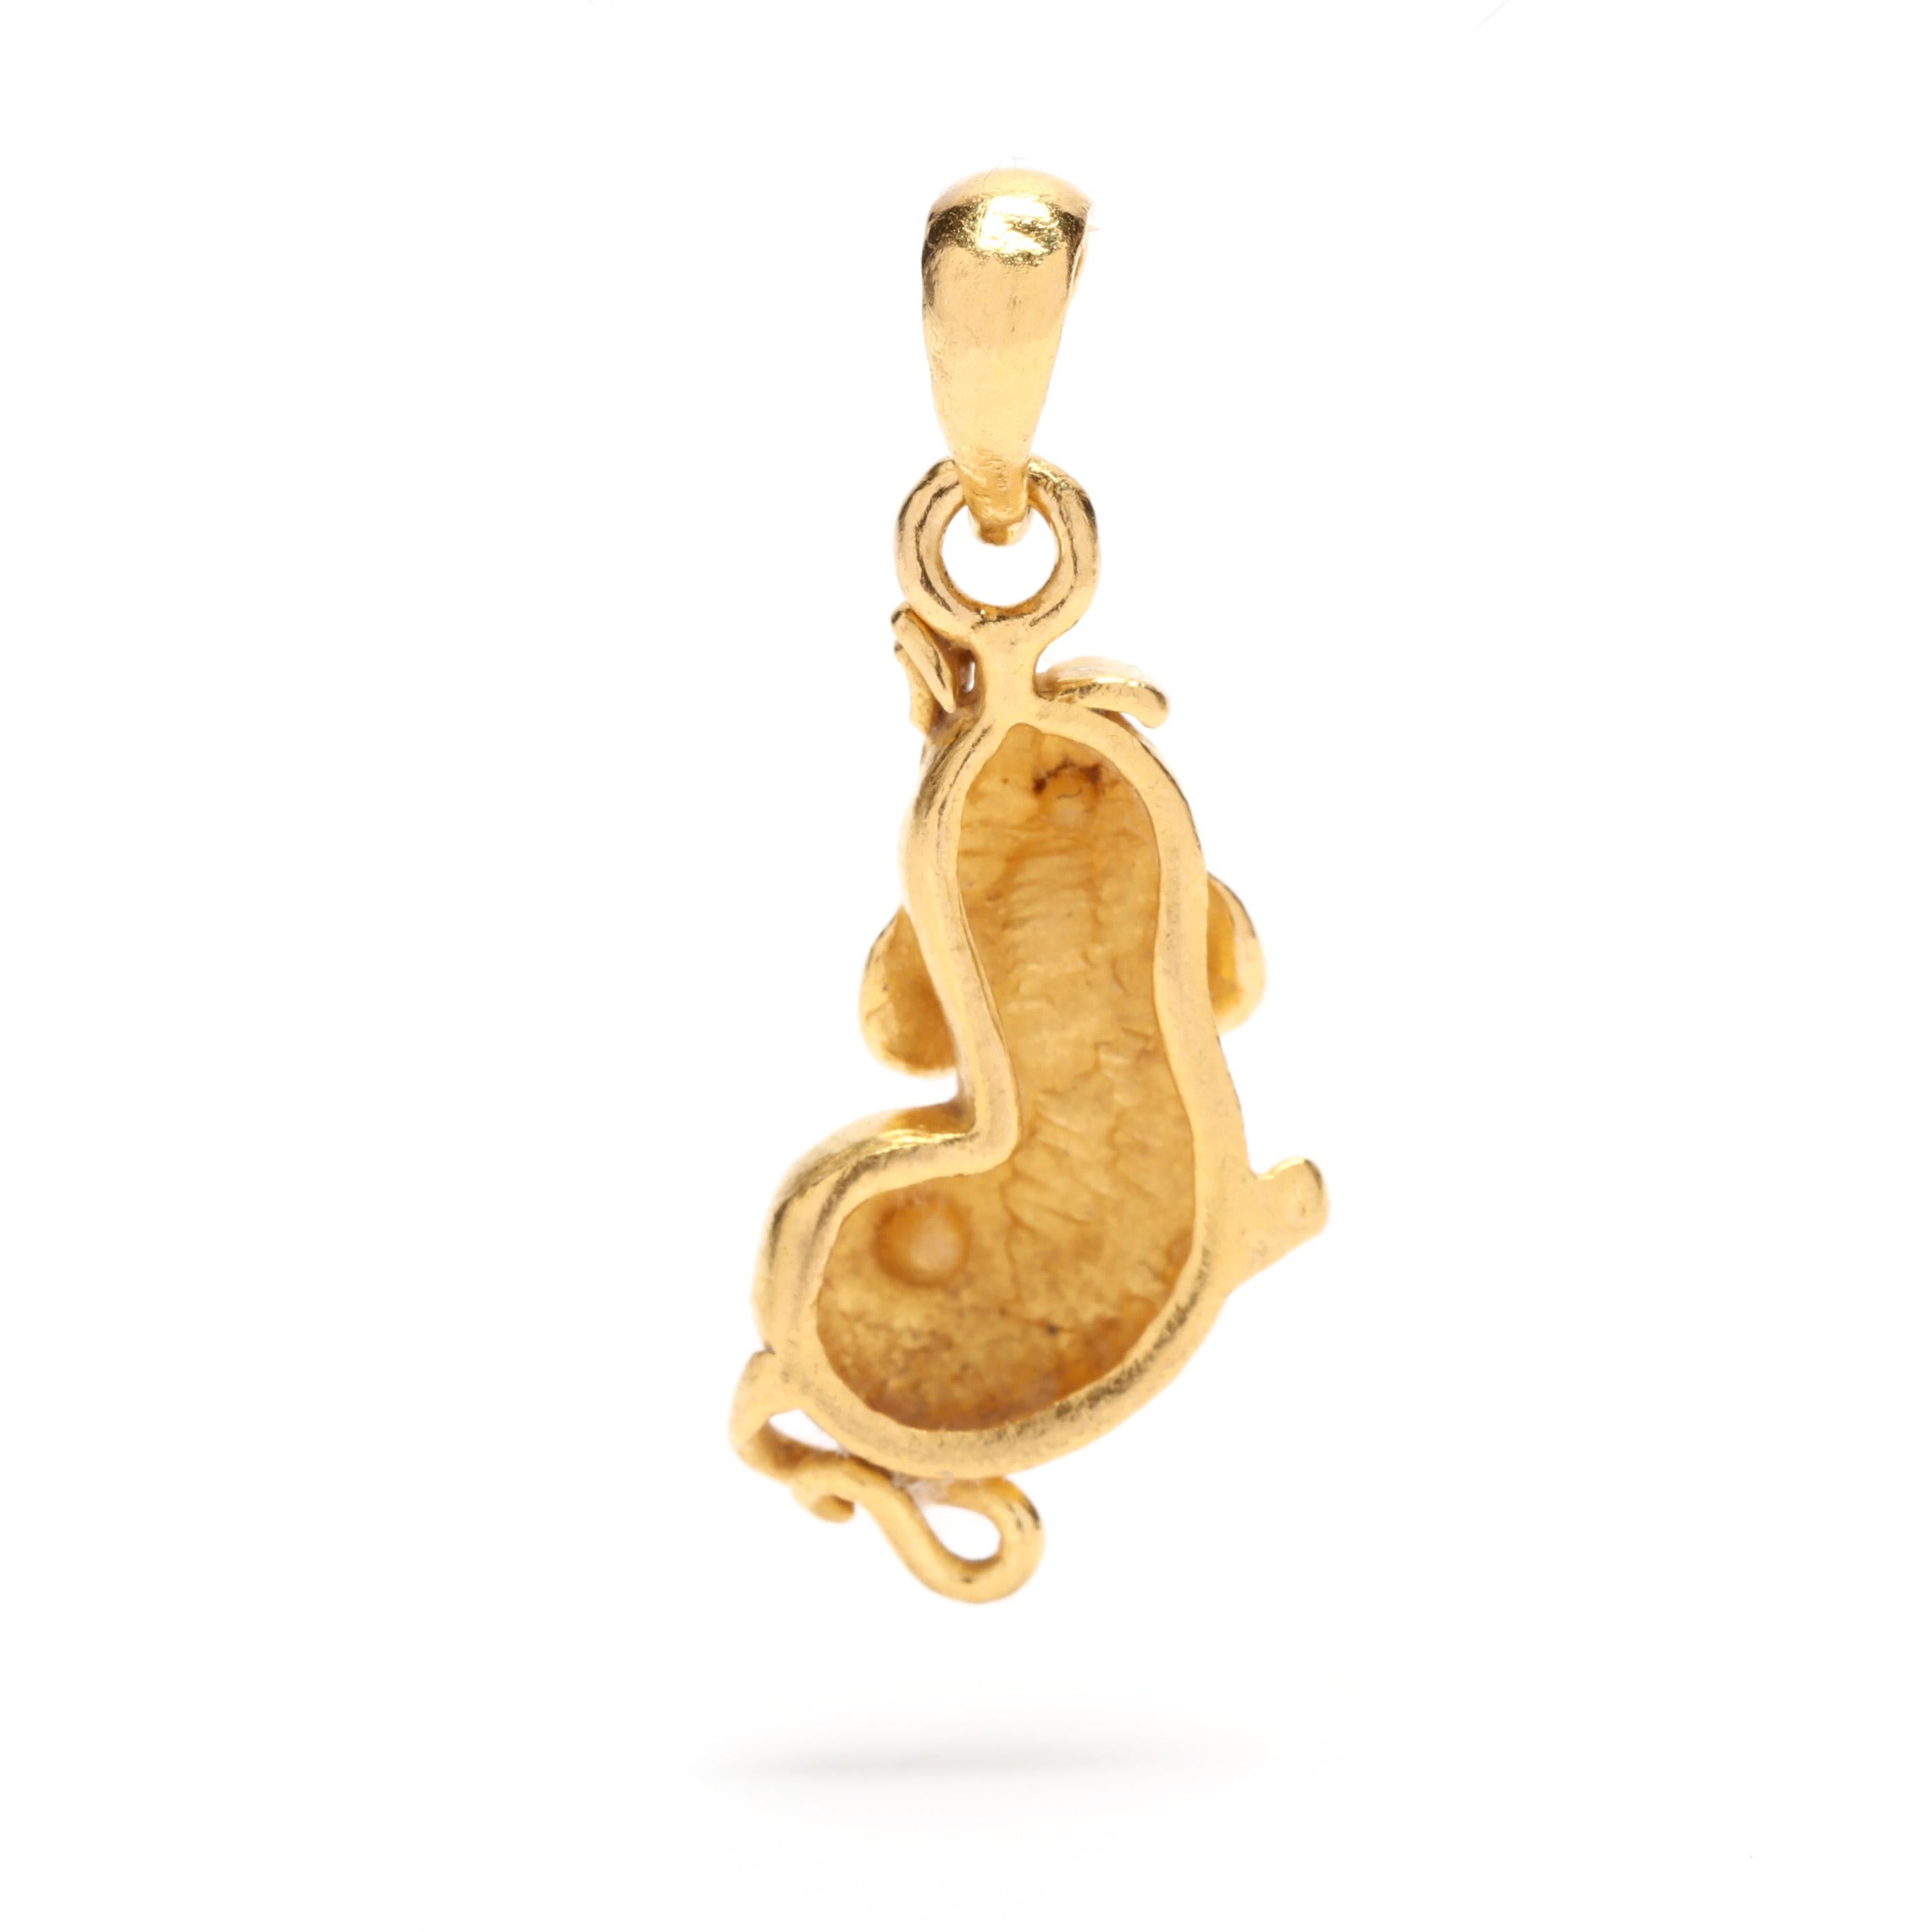 A vintage 22 karat yellow gold mouse charm. This high karat gold charm features a small mouse motif suspended from a thin tapered bail.

Length: 7/8 in.

Width: 3/8 in.

Weight: 1.7 dwts. / 2.64 grams

Metal: 22KT (tested)

Ring Sizings &